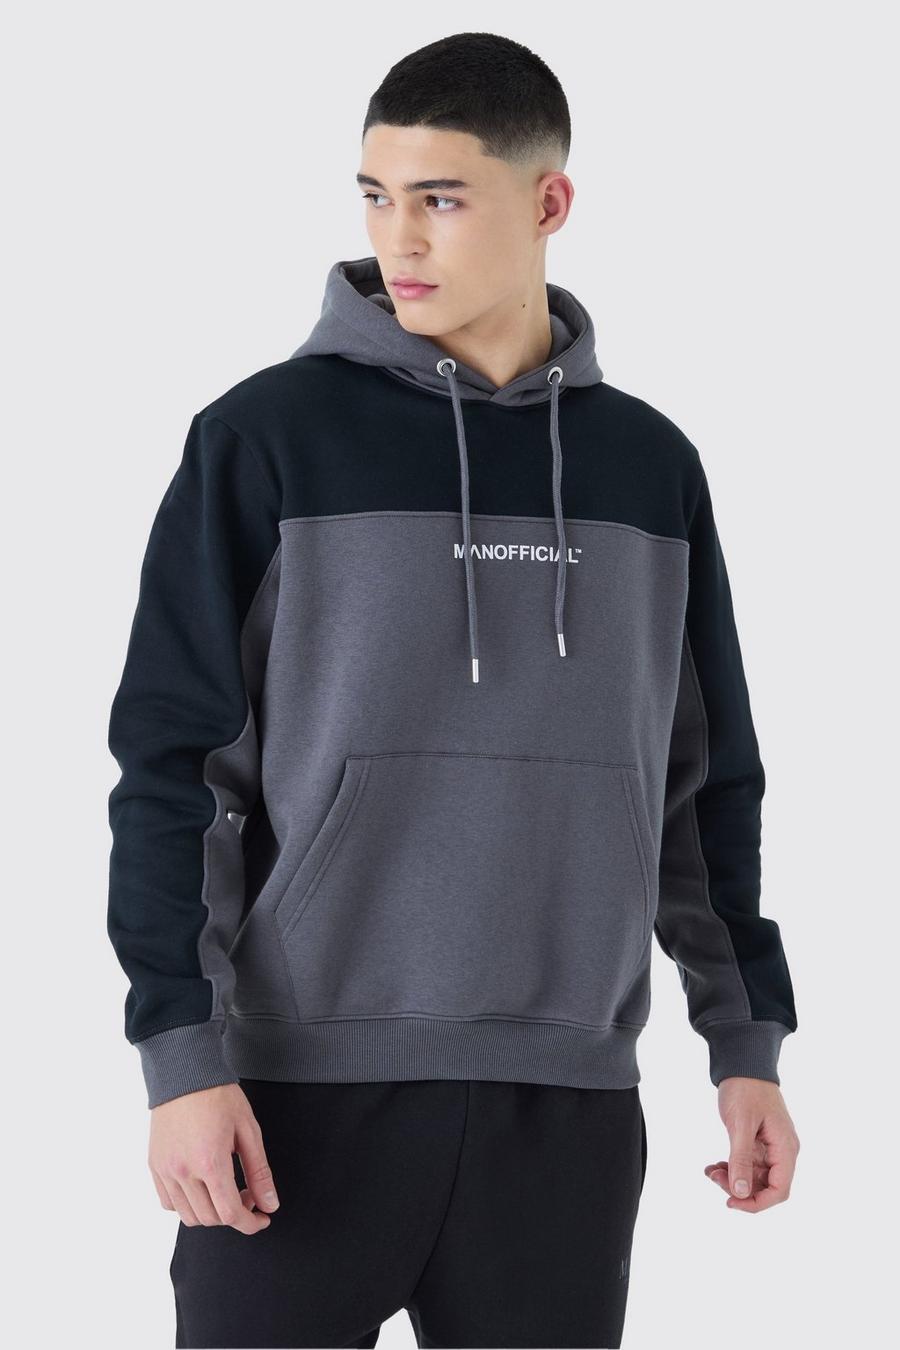 Man Official Colorblock Hoodie, Charcoal image number 1